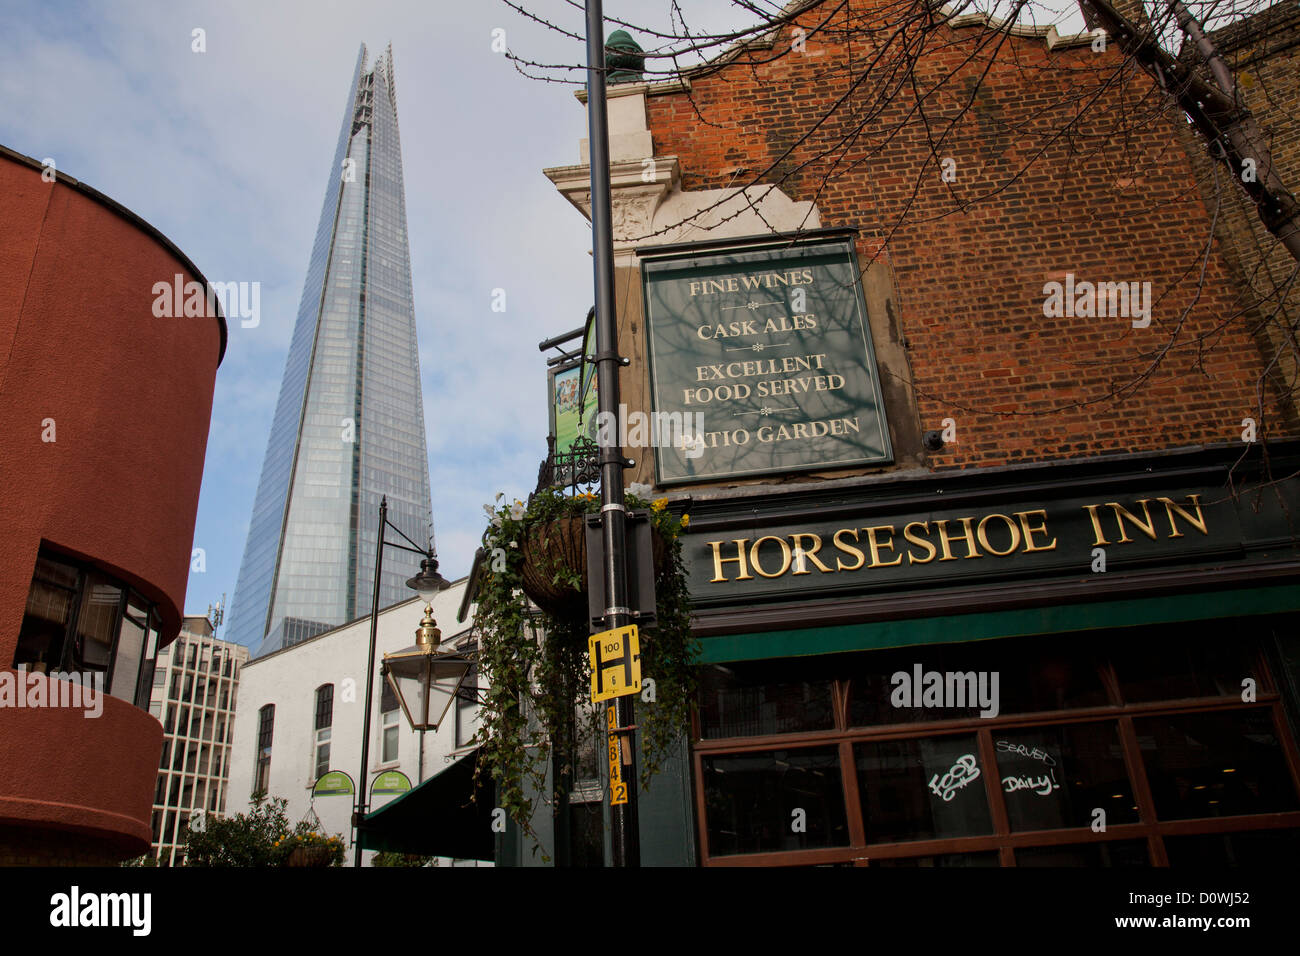 VIEW OF THE SHARD TOWER IN LONDON, THE TALLEST BUILDING IN UK,  AND SURROUNDINGS IN BERMONDSEY, SOUTHWARK BOROUGH COUNCIL Stock Photo